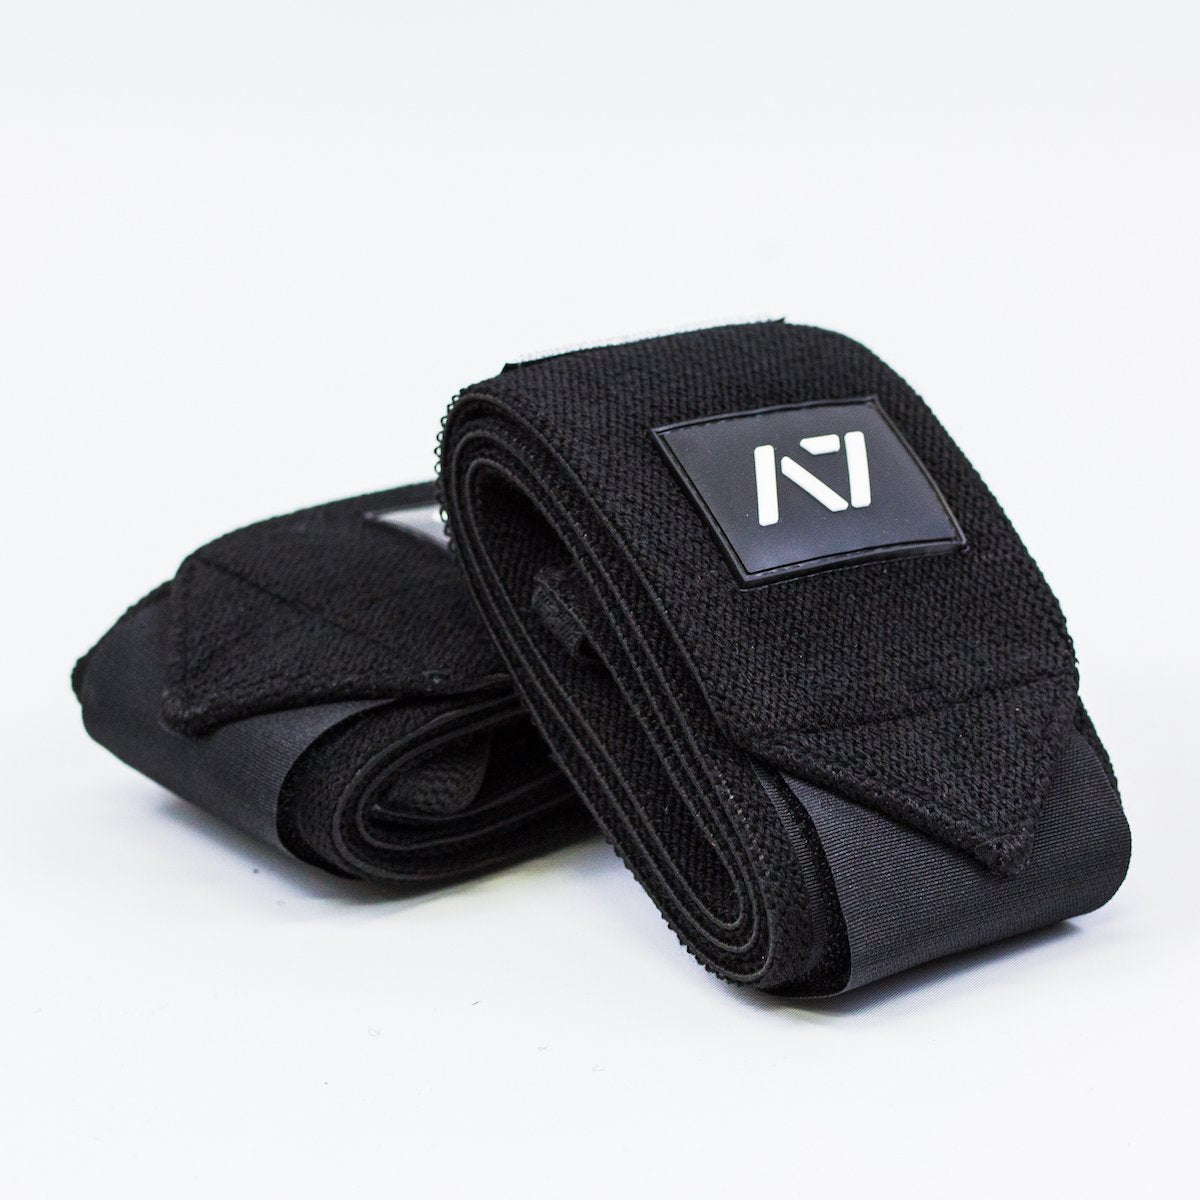 Whether you are benching or squatting, A7 wrist wraps are a perfect addition to your gym bag and IPF approved kit. These wraps feature double thumb loops so you don't ever have to worry about which way you have to put them on. We offer these wrist wraps in 3 sizes : 55 cm, 77 cm and 99 cm.  A7 Wrist Wraps are IPF approved.